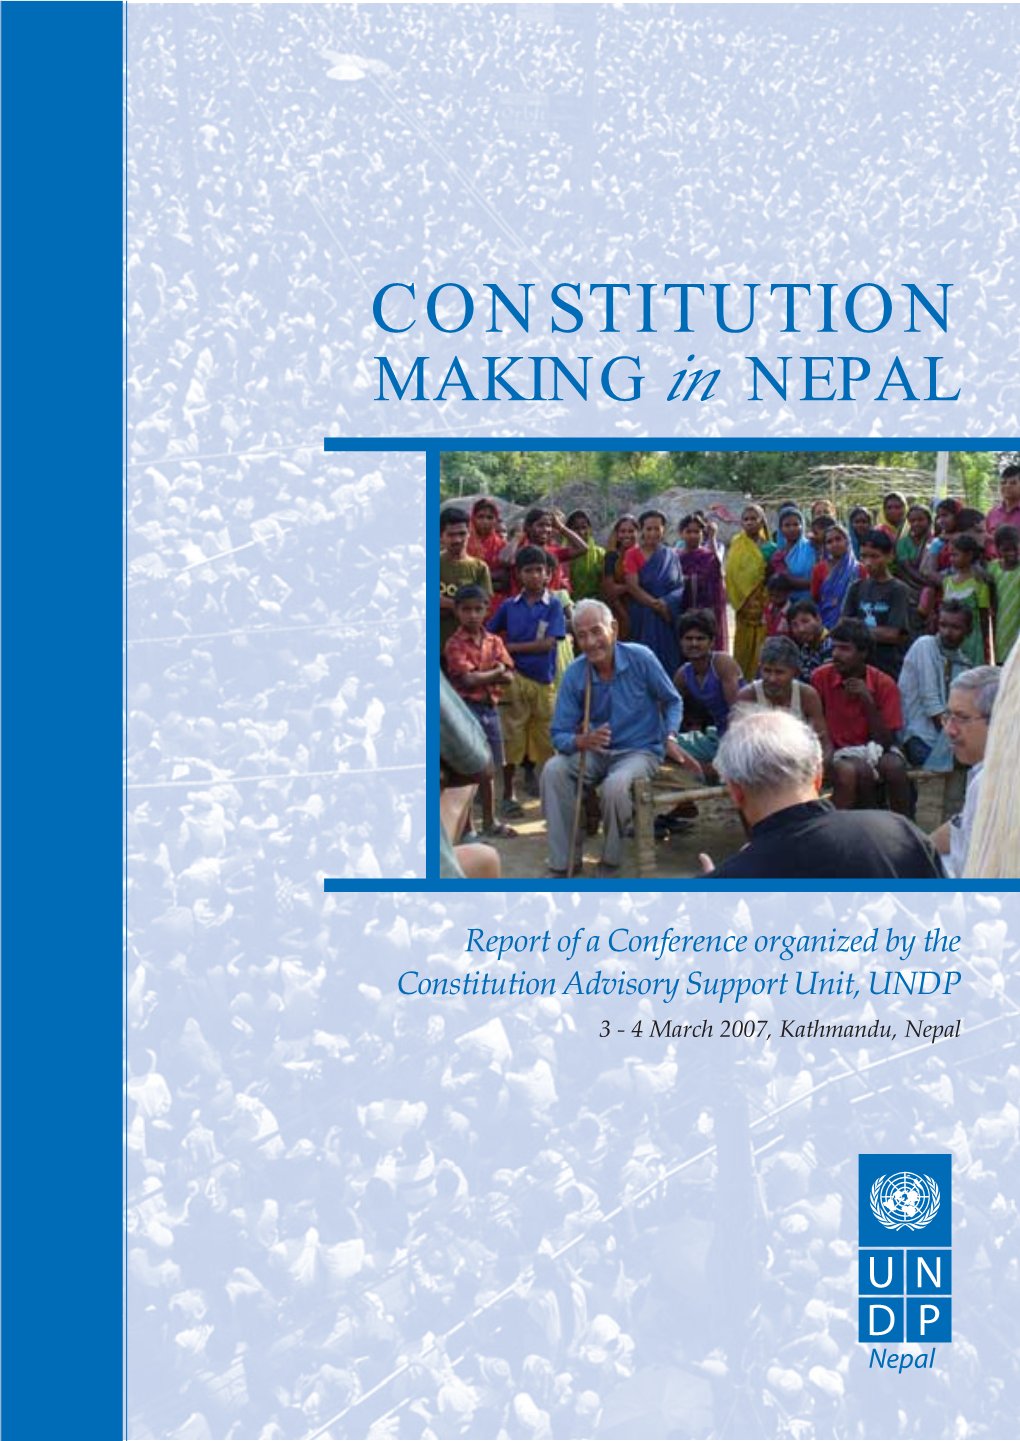 Constitution Making for Nepal Chairperson: Hon’Ble Bhoj Raj Pokhrel, Chief Election Commissioner Speakers: Mr